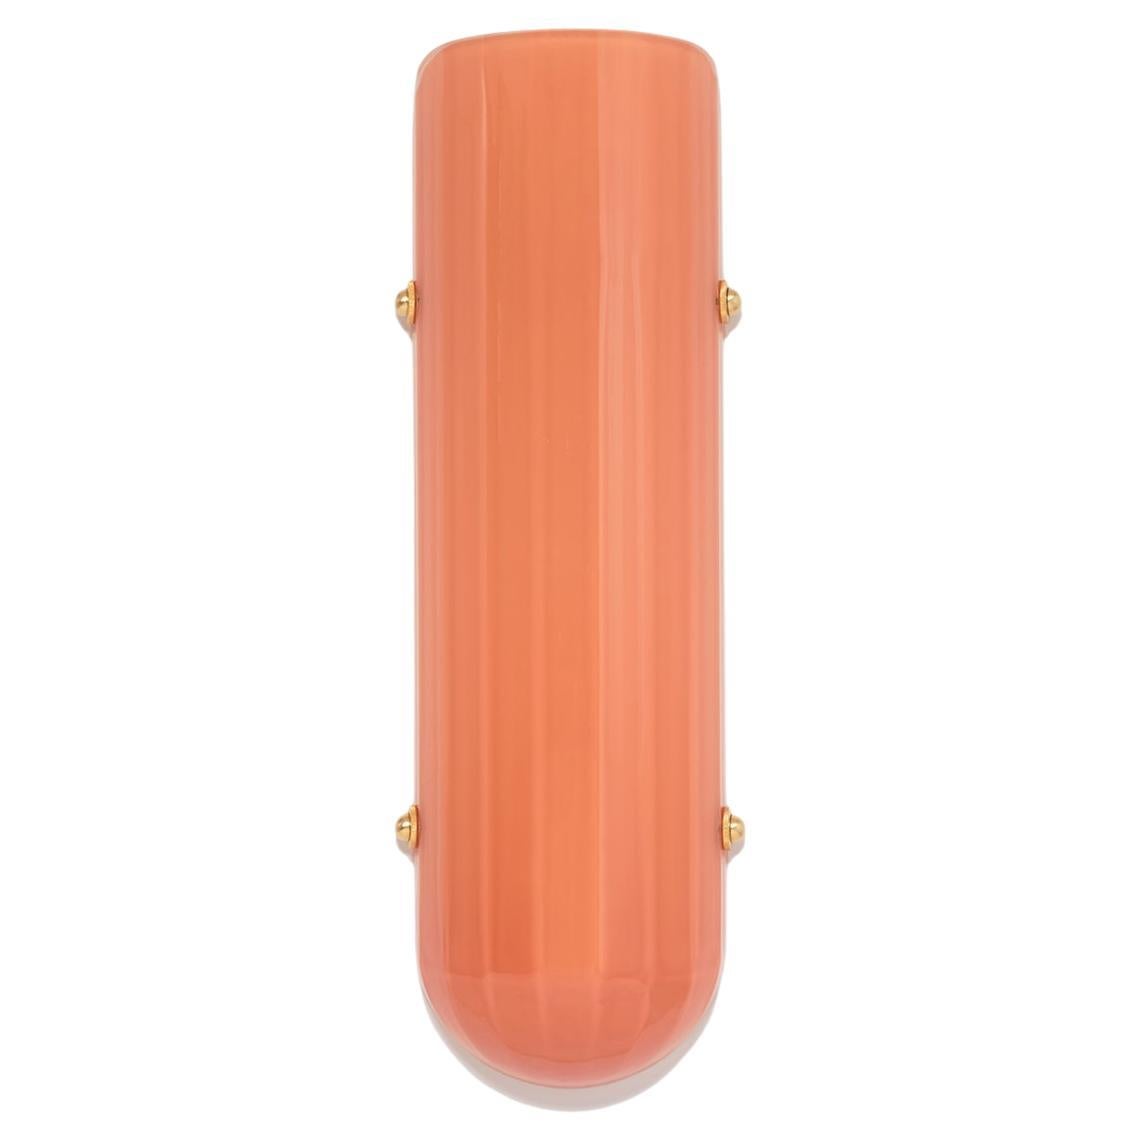 Selene Streamline Moderne Inspired Blown Coral Glass and Brass Wall Sconce